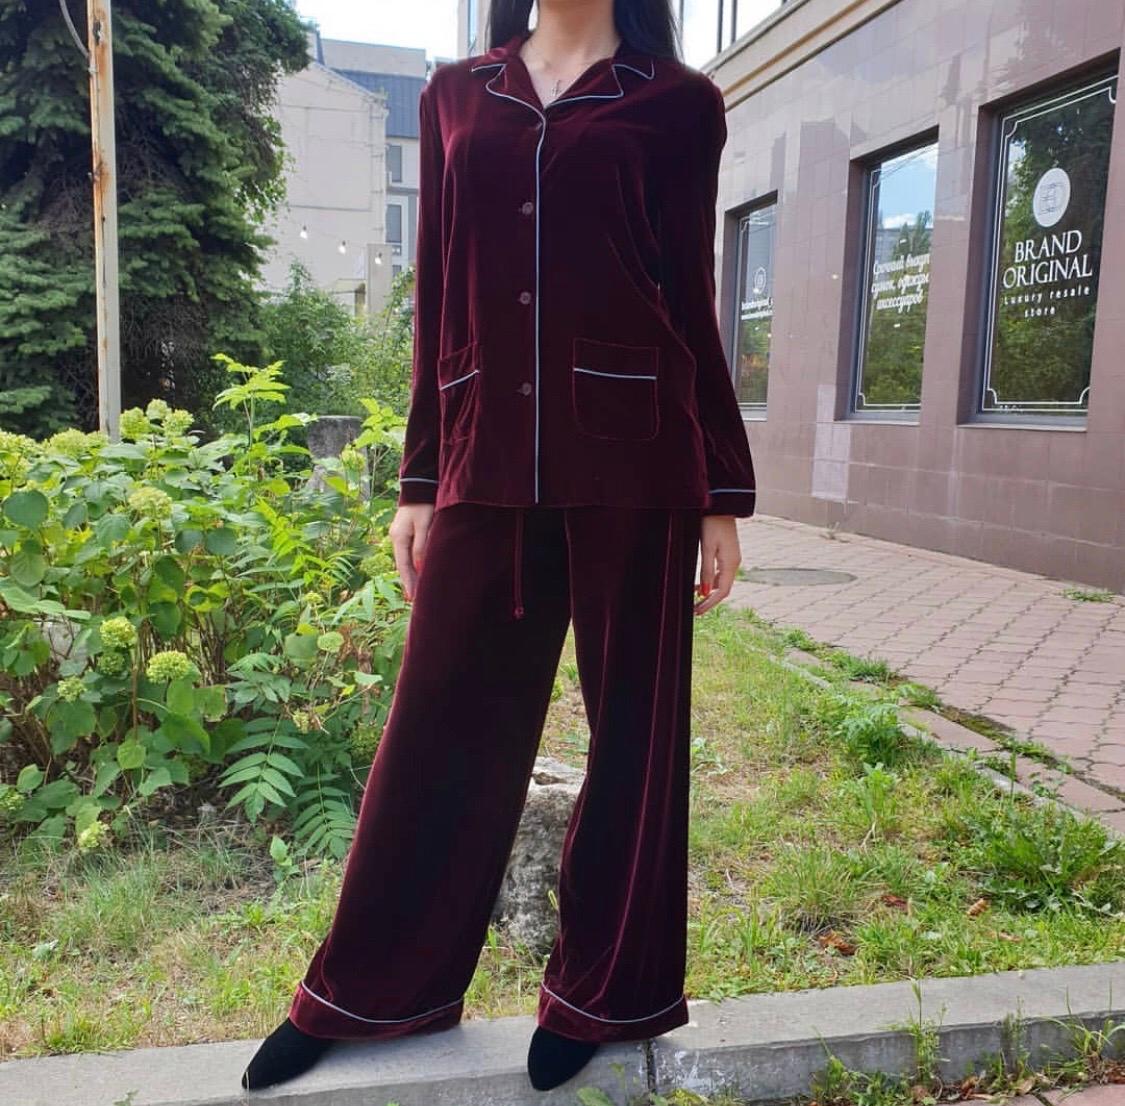 Velvet is this season's most coveted fabric. Valentino takes a relaxed approach with this plush burgundy pyjama set. It has a loose silhouette with notch lapels, and is trimmed in contrasting slate-blue silk.
Burgundy, soft-touch lightweight